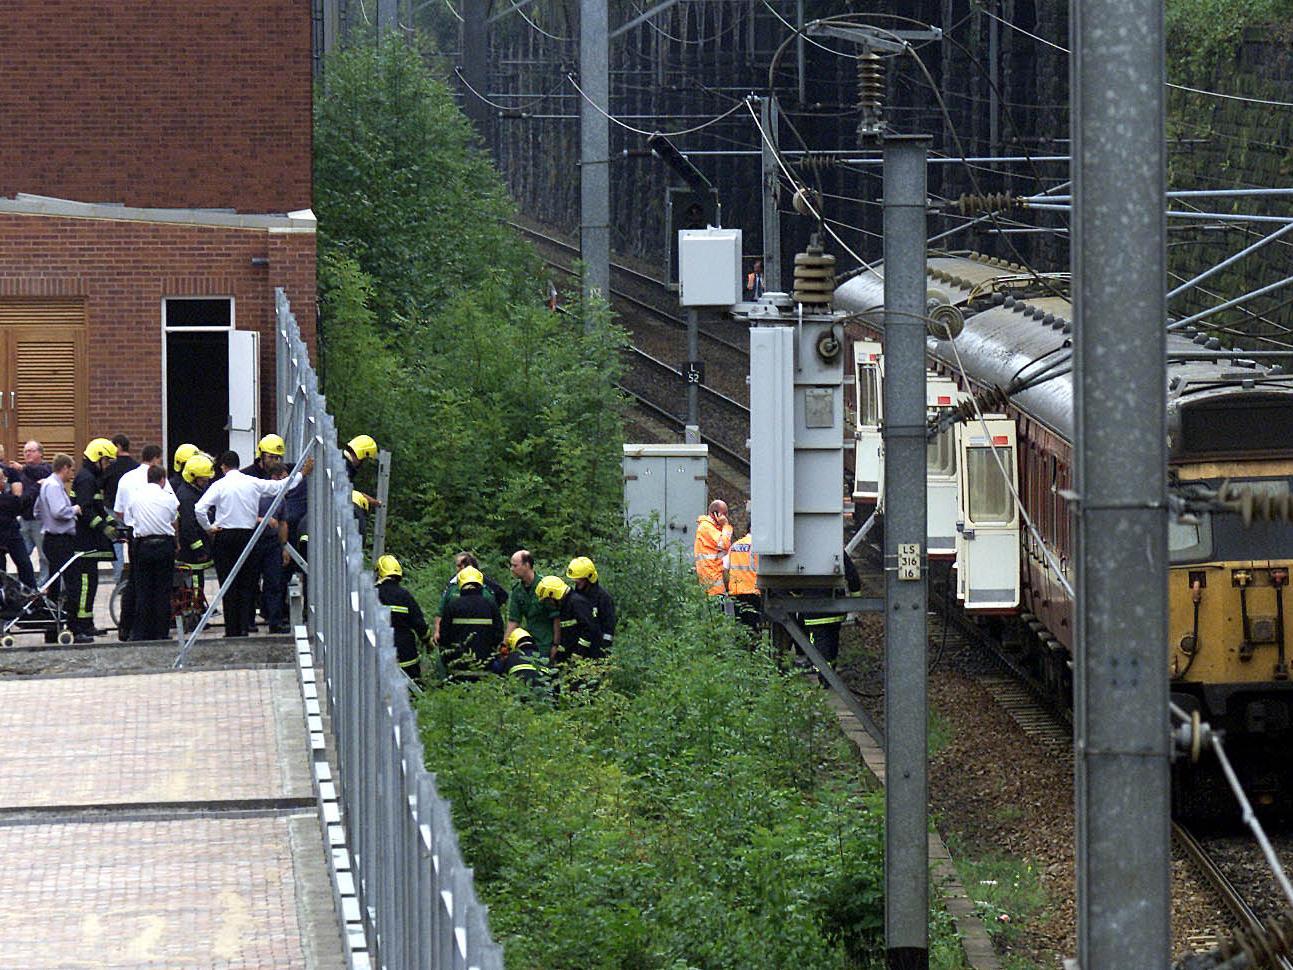 Passengers are evacuated from a train after the middle carriage of the passenger train caught fire at the old Armley railway station on Canal Road. Nobody was injured and around 50 passengers were evacuated.